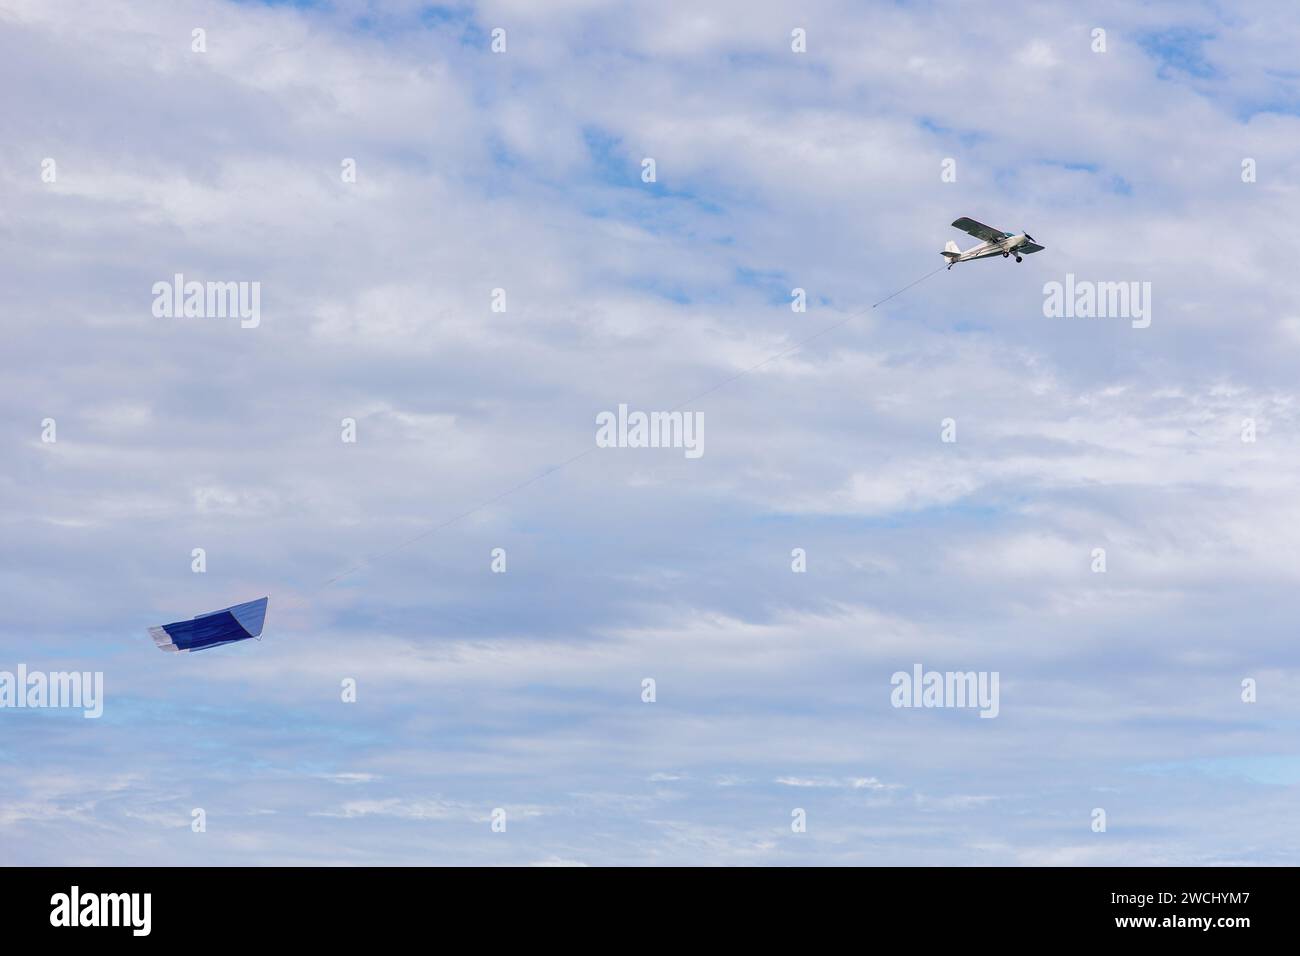 Small plane with blank advertising sign flying over a sky with clouds. Stock Photo